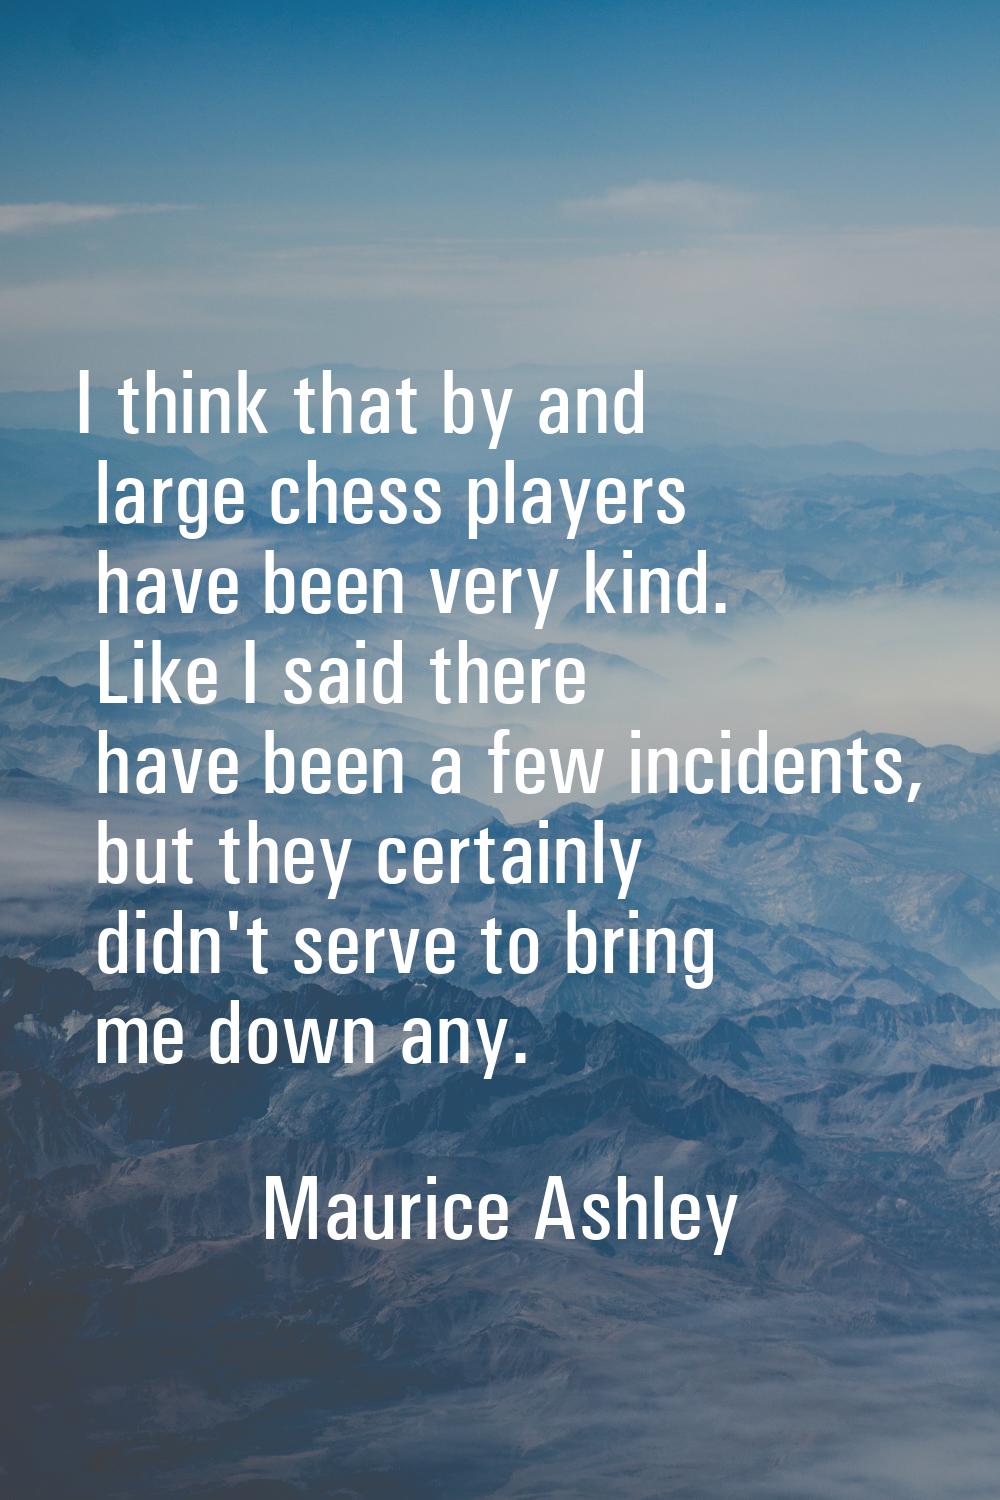 I think that by and large chess players have been very kind. Like I said there have been a few inci